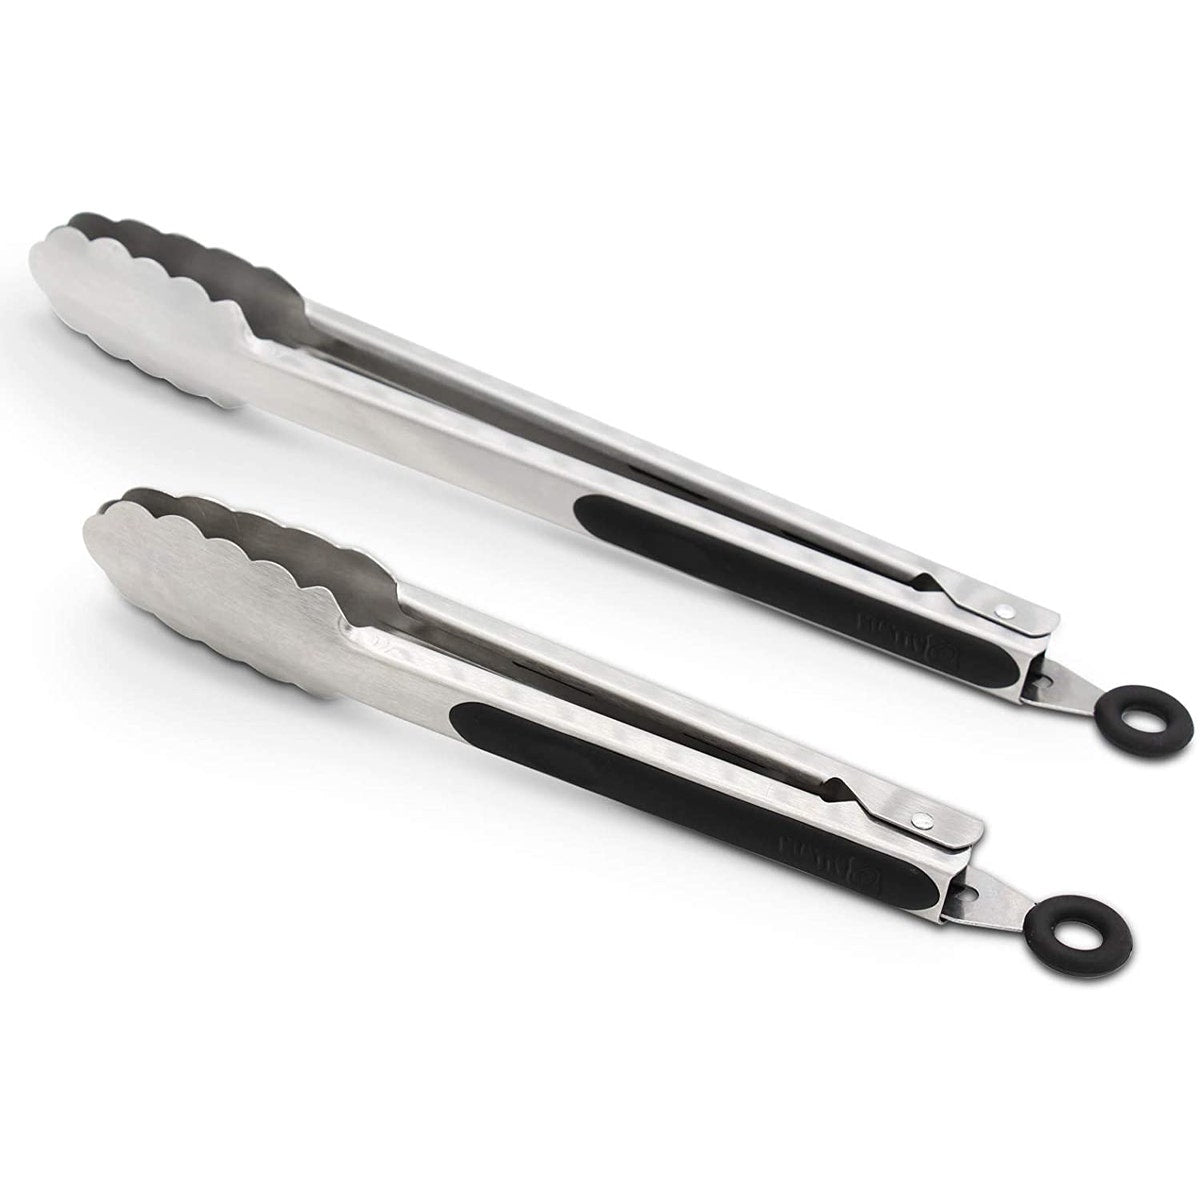 2pc Stainless Steel Locking Tongs 9 & 12” – For Cooking & Serving